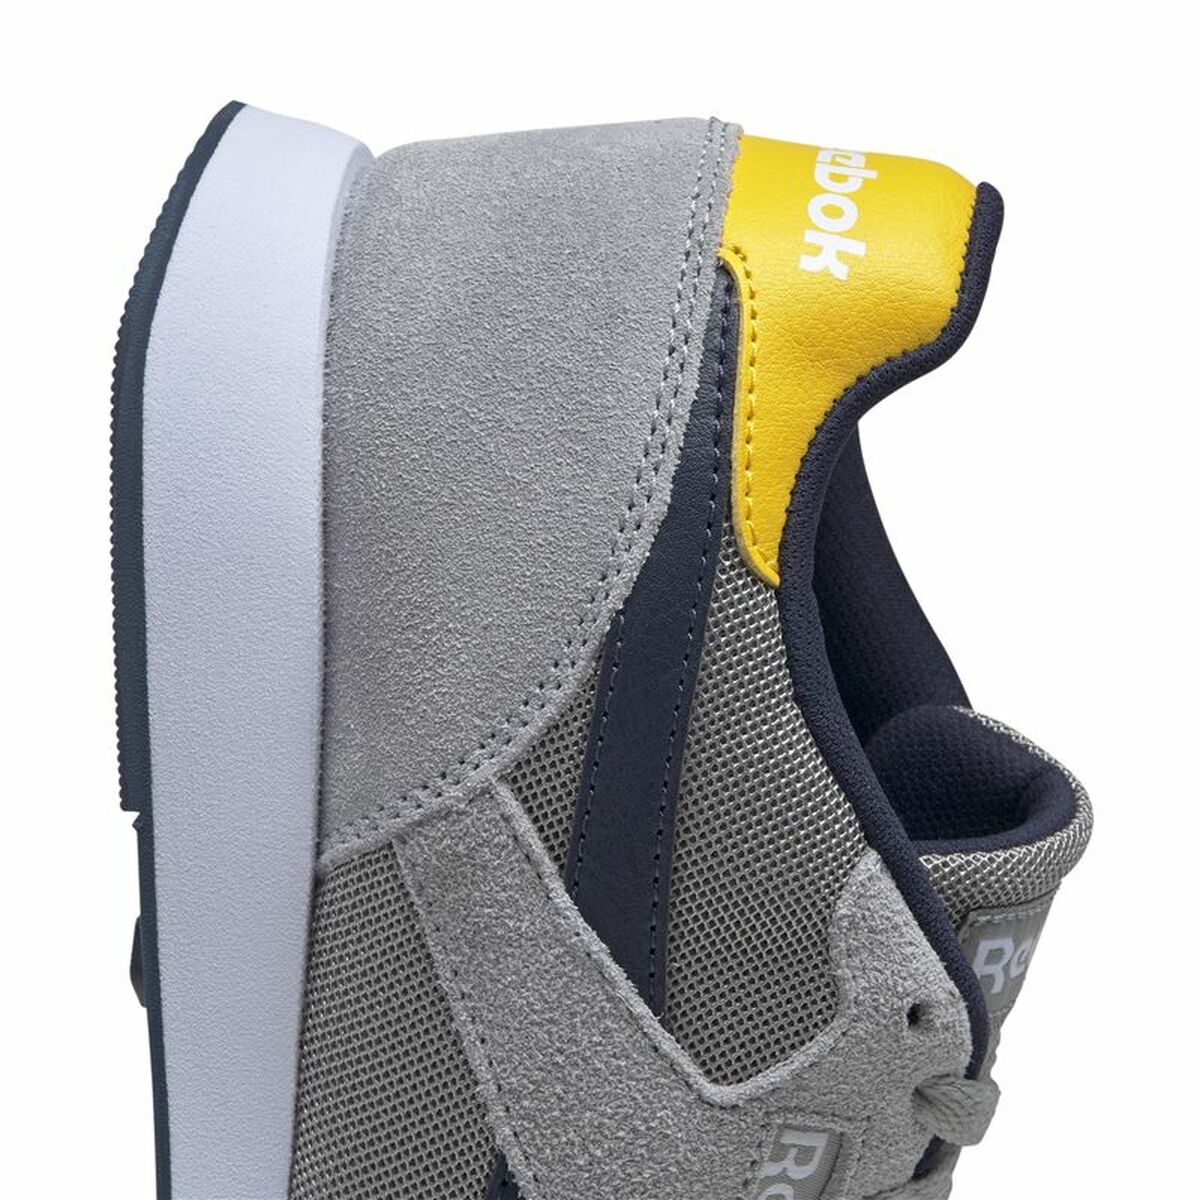 Chaussures casual homme Reebok Royal Ultra Gris